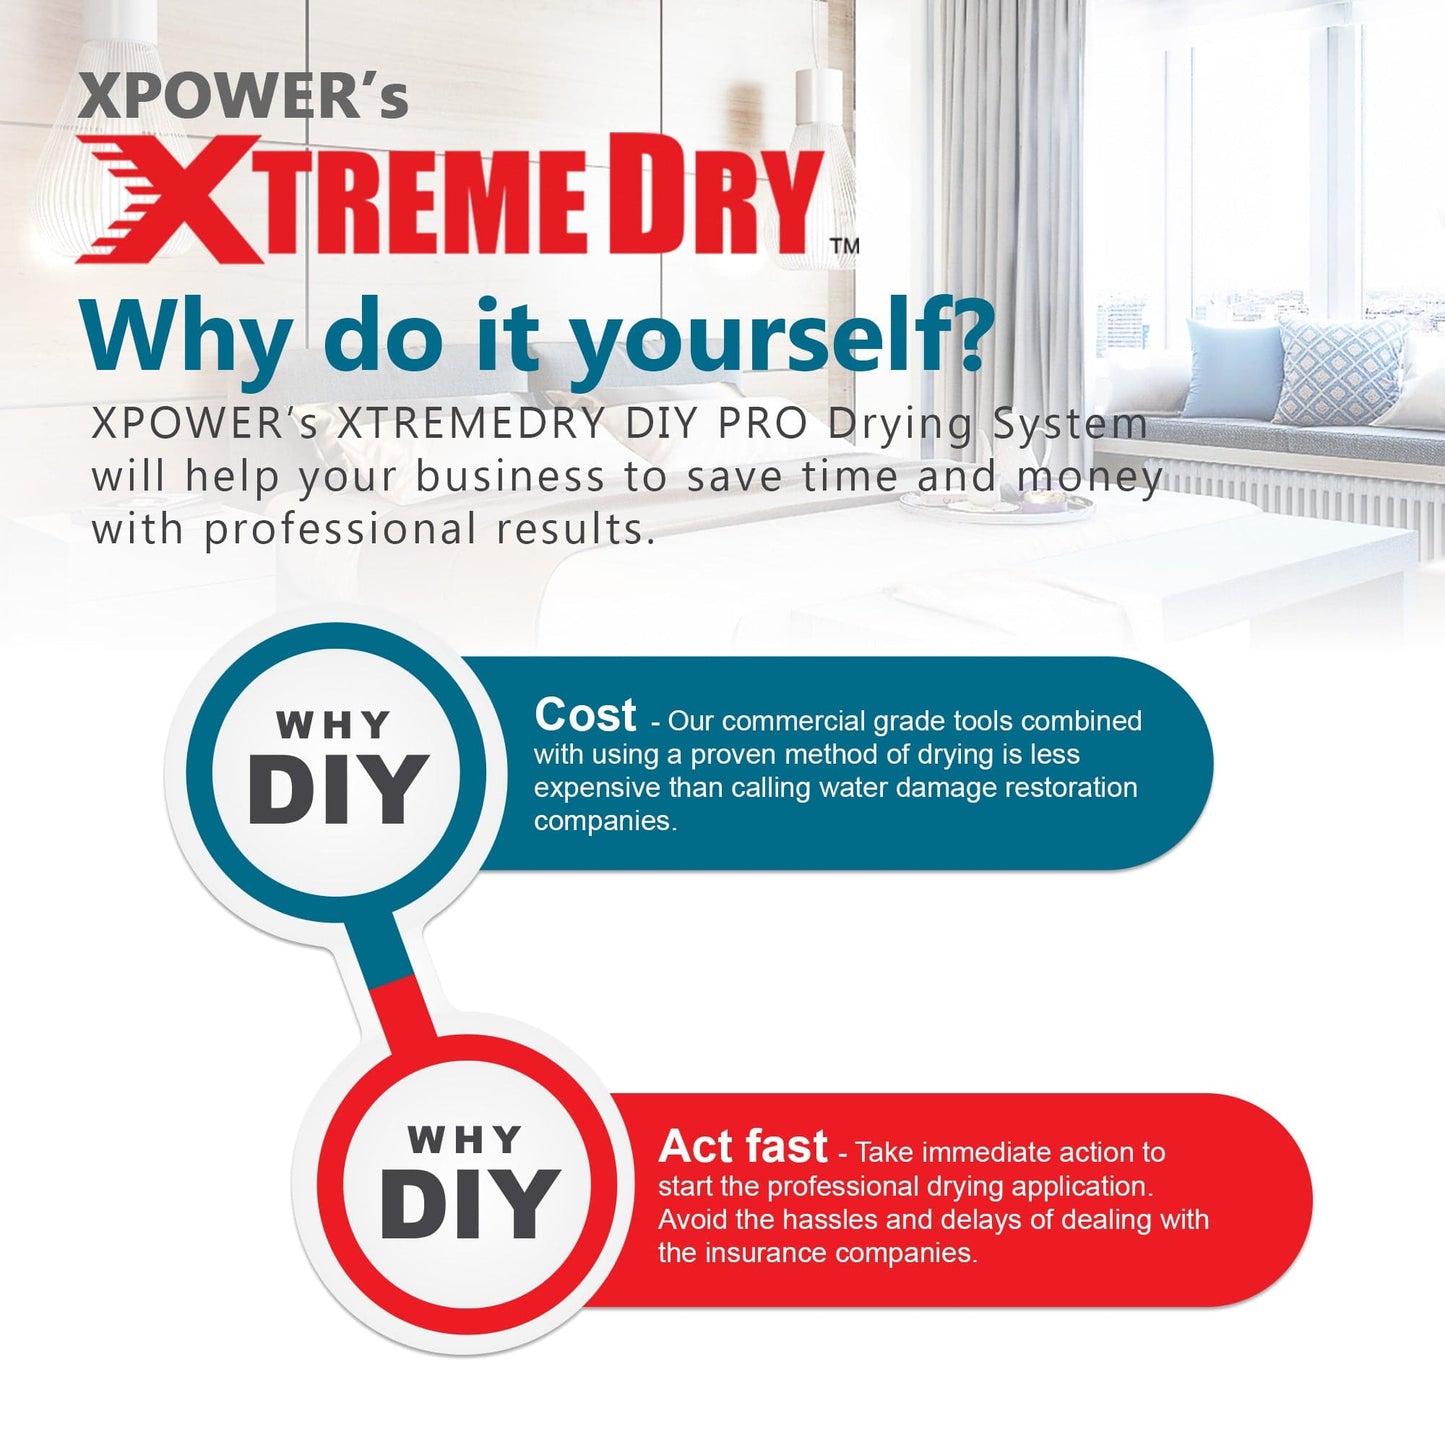 XPOWER 3 Piece Water Damage Restoration Bundle | XtremeDry Mojave DIY Drying System with Air Scrubber, LGR Dehumidifier, and Air Mover